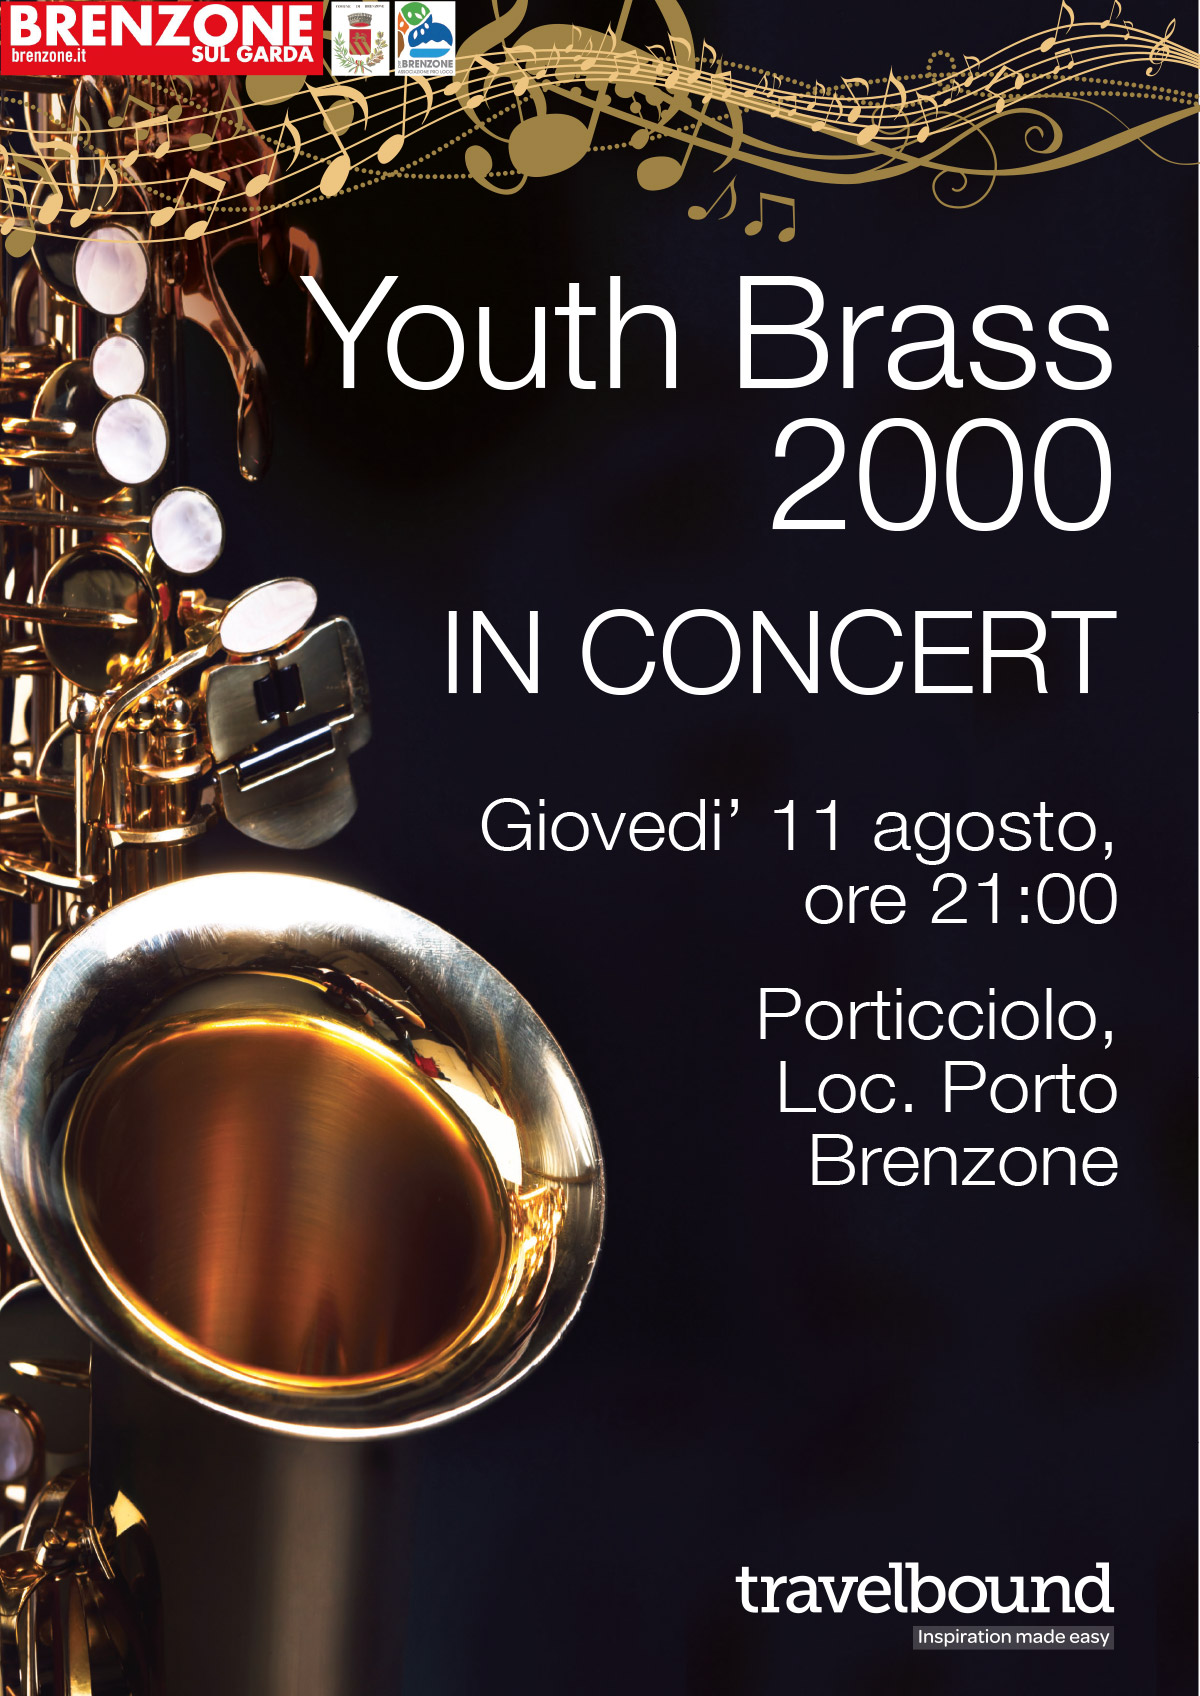 Youth Brass 2000 in concert